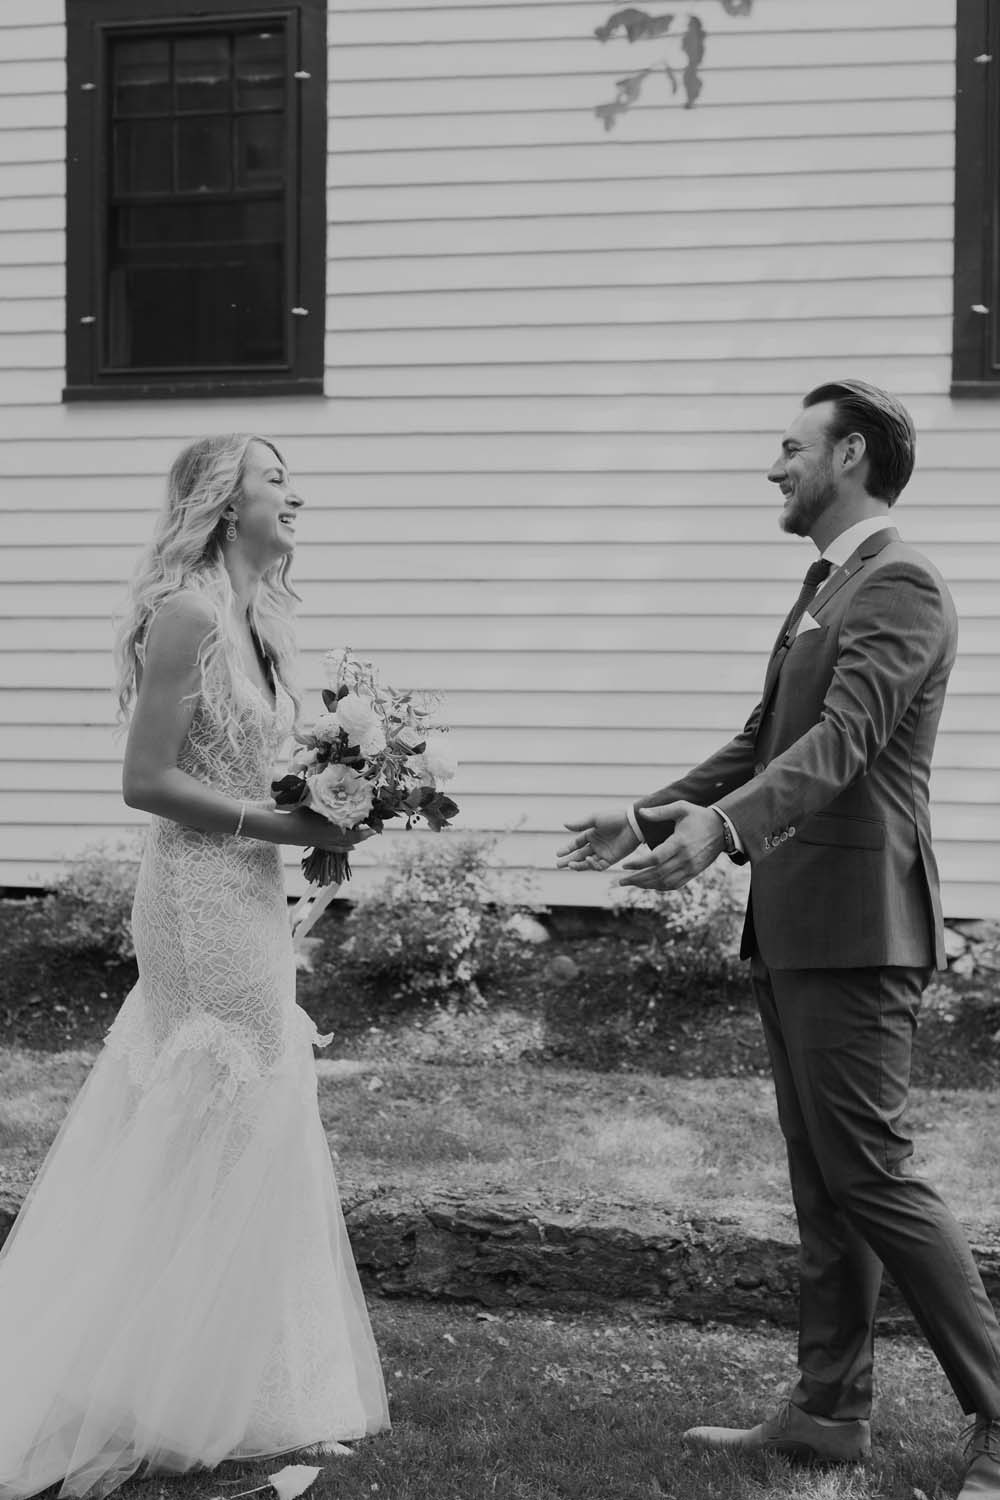 A Whimsical Wedding at Windmill Point, Ontario - First Look